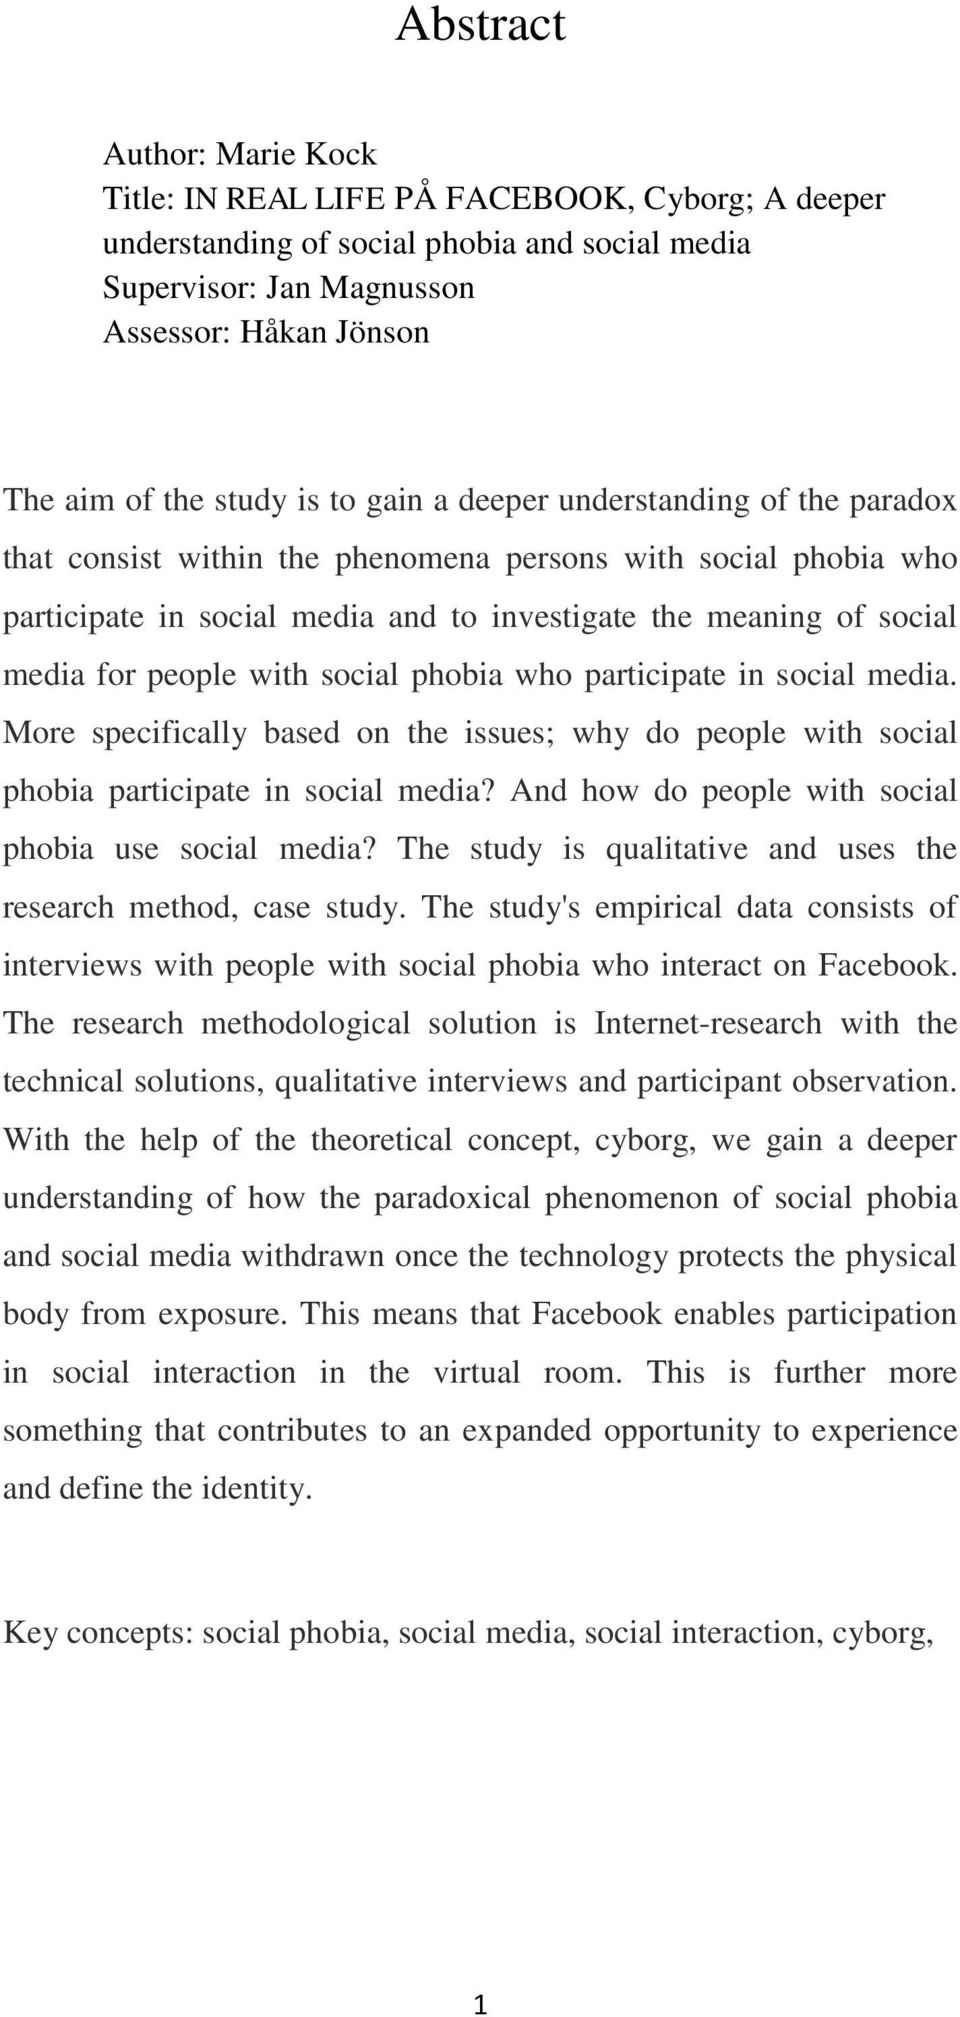 with social phobia who participate in social media. More specifically based on the issues; why do people with social phobia participate in social media?